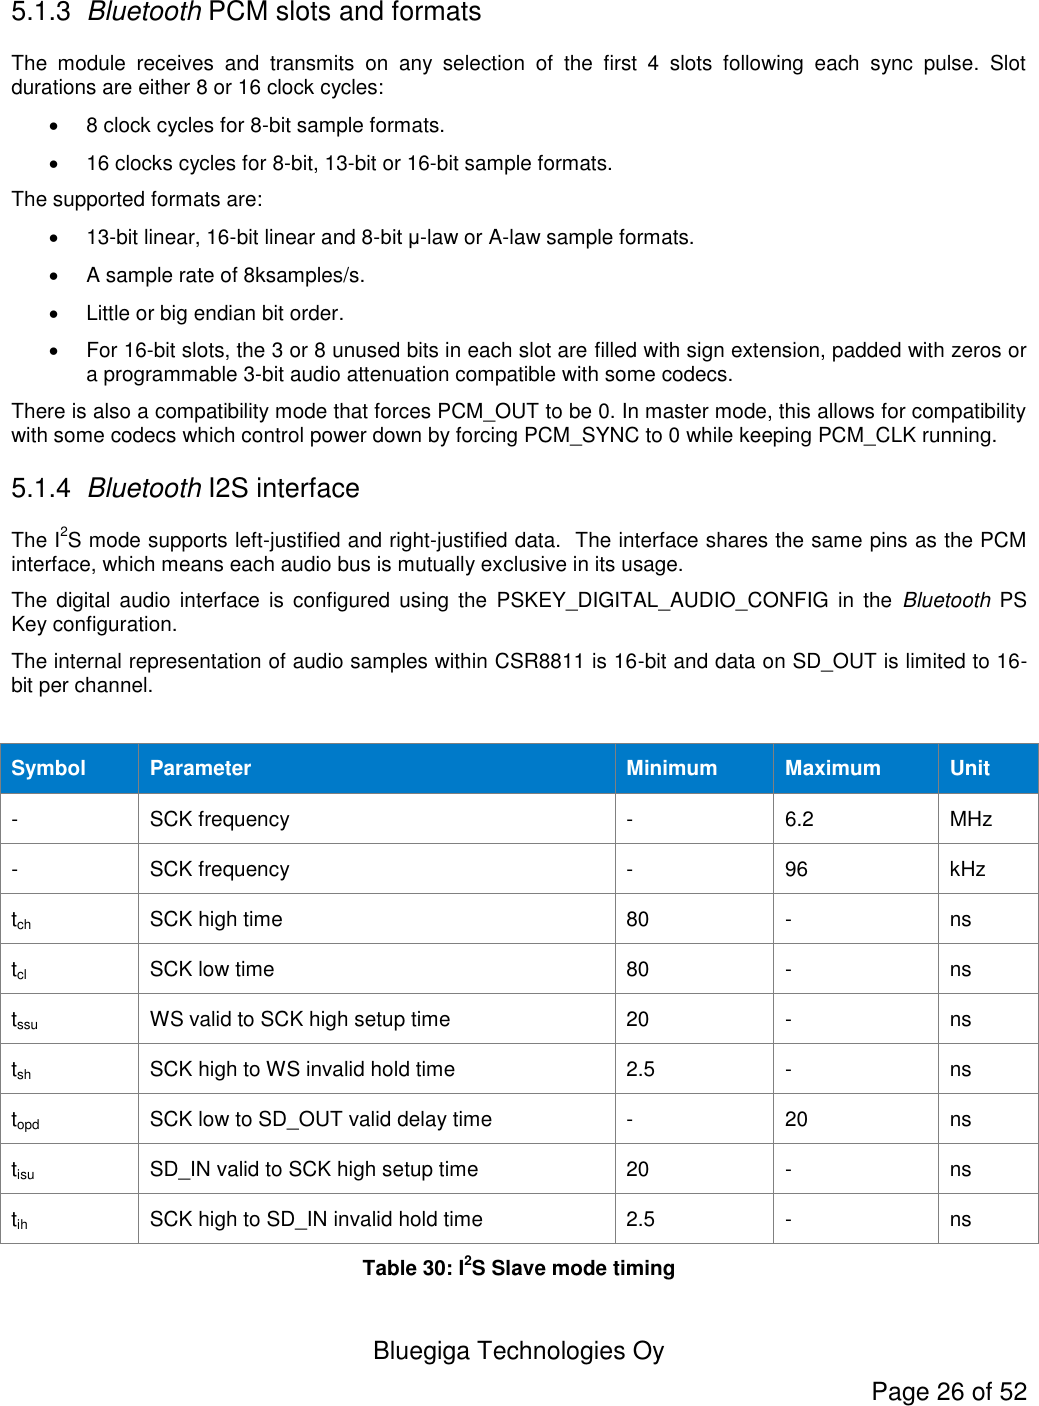  Bluegiga Technologies Oy Page 26 of 52  5.1.3 Bluetooth PCM slots and formats The  module  receives  and  transmits  on  any  selection  of  the  first  4  slots  following  each  sync  pulse.  Slot durations are either 8 or 16 clock cycles:   8 clock cycles for 8-bit sample formats.   16 clocks cycles for 8-bit, 13-bit or 16-bit sample formats. The supported formats are:  13-bit linear, 16-bit linear and 8-bit μ-law or A-law sample formats.   A sample rate of 8ksamples/s.   Little or big endian bit order.   For 16-bit slots, the 3 or 8 unused bits in each slot are filled with sign extension, padded with zeros or a programmable 3-bit audio attenuation compatible with some codecs. There is also a compatibility mode that forces PCM_OUT to be 0. In master mode, this allows for compatibility with some codecs which control power down by forcing PCM_SYNC to 0 while keeping PCM_CLK running. 5.1.4 Bluetooth I2S interface The I2S mode supports left-justified and right-justified data.  The interface shares the same pins as the PCM interface, which means each audio bus is mutually exclusive in its usage. The  digital  audio  interface  is  configured  using  the  PSKEY_DIGITAL_AUDIO_CONFIG  in  the  Bluetooth  PS Key configuration. The internal representation of audio samples within CSR8811 is 16-bit and data on SD_OUT is limited to 16-bit per channel.  Symbol Parameter Minimum Maximum Unit - SCK frequency - 6.2 MHz - SCK frequency - 96 kHz tch SCK high time 80 - ns tcl SCK low time 80 - ns tssu WS valid to SCK high setup time 20 - ns tsh SCK high to WS invalid hold time 2.5 - ns topd SCK low to SD_OUT valid delay time - 20 ns tisu SD_IN valid to SCK high setup time 20 - ns tih SCK high to SD_IN invalid hold time 2.5 - ns Table 30: I2S Slave mode timing 